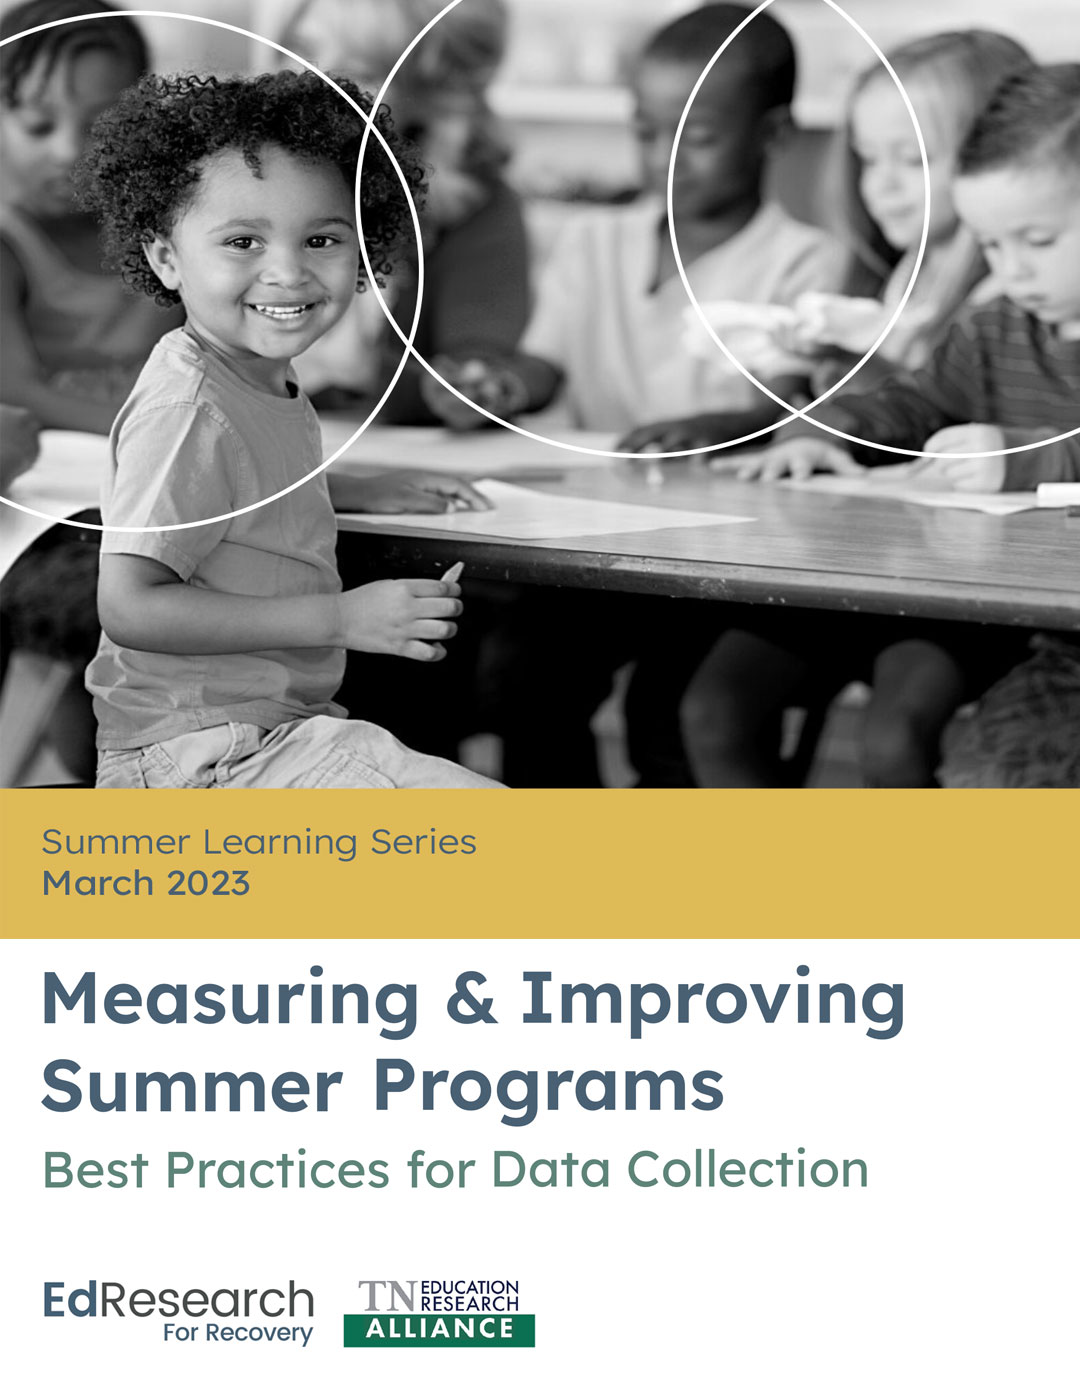 Measuring & Improving Summer Programs - Best Practices for Data Collection